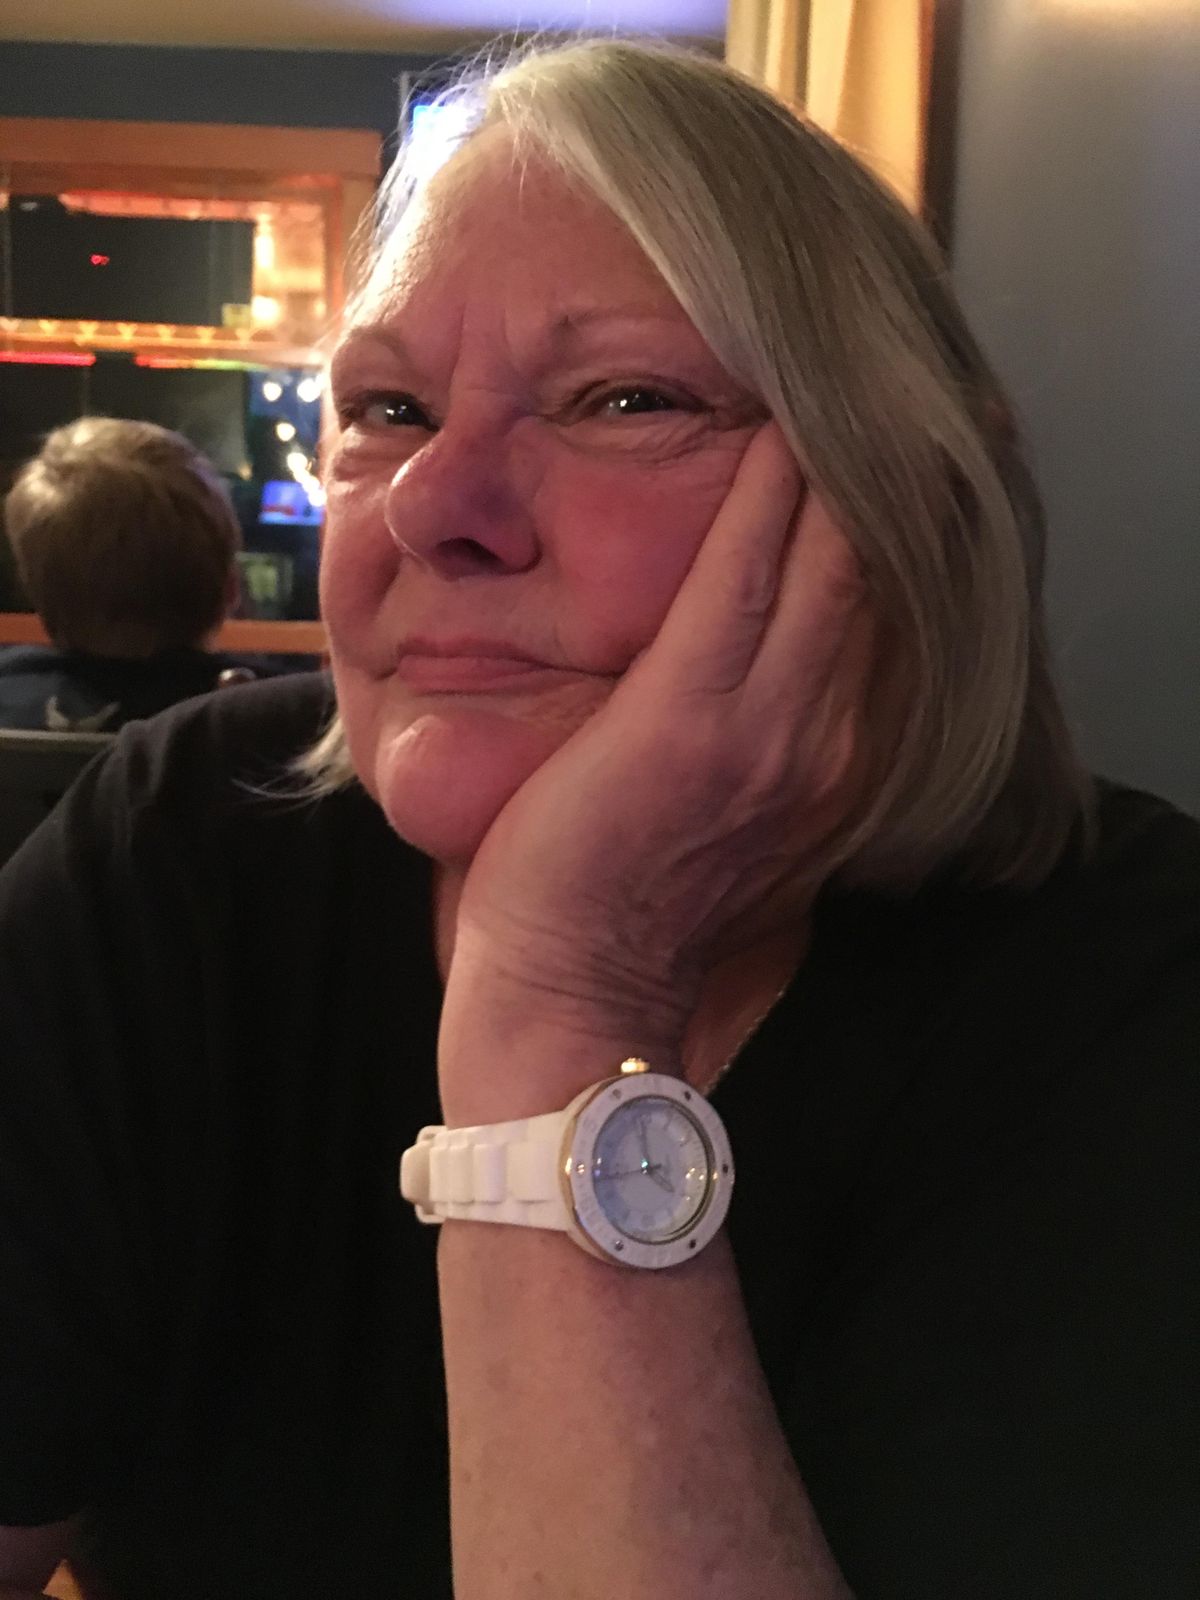 Paulette Taylor watched Monday’s debate at Browne’s Tavern. “I haven’t heard anything new. It’s the same old thing,” she said. “I thought this (going out) would be better than screaming at my T.V.” (Eli Francovich / The Spokesman-Review)